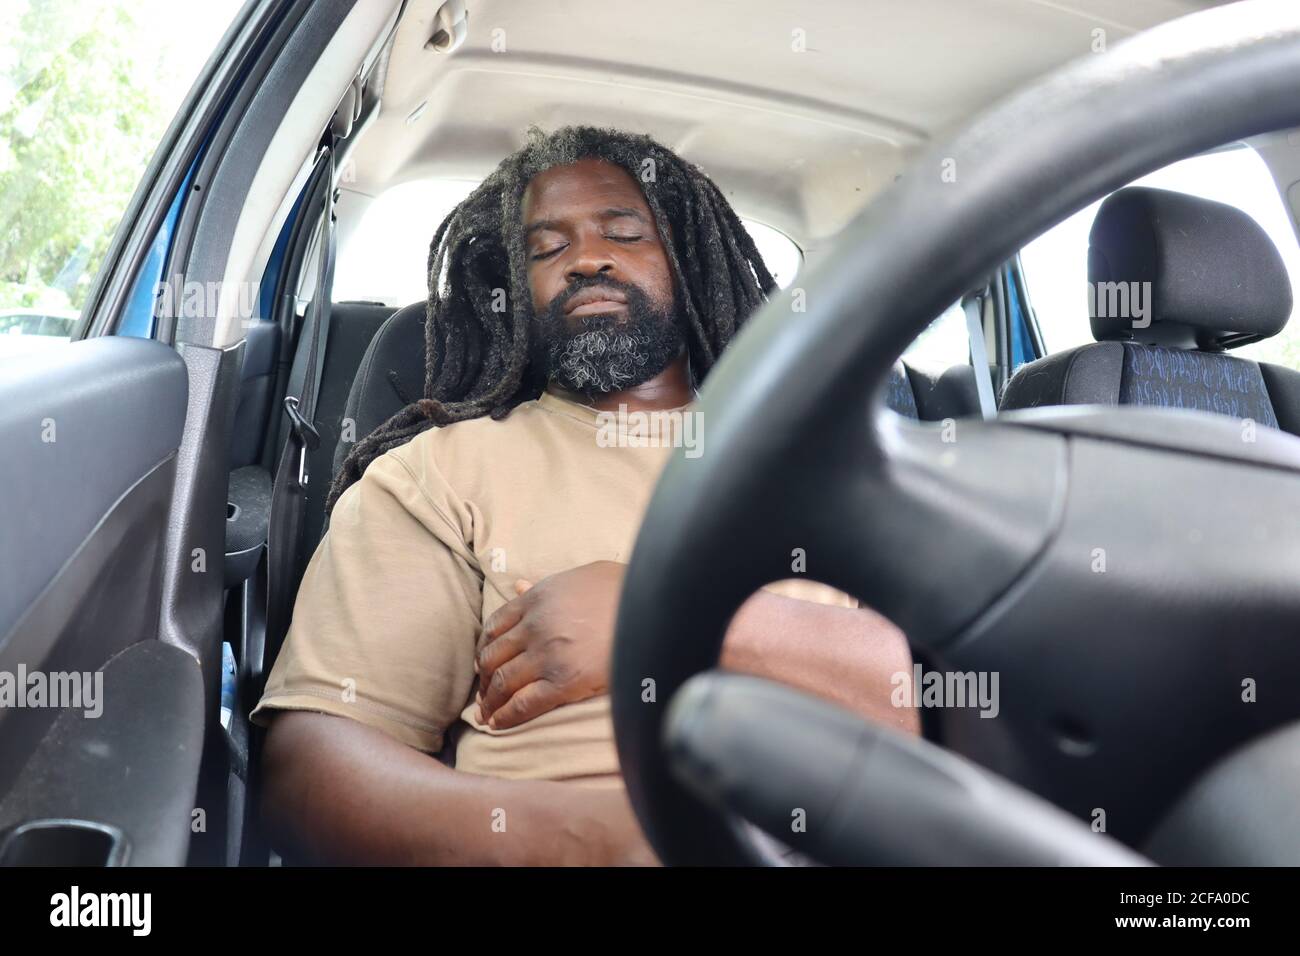 Tired driver resting on long journey. Man sleeps in car for a break. Stock Photo